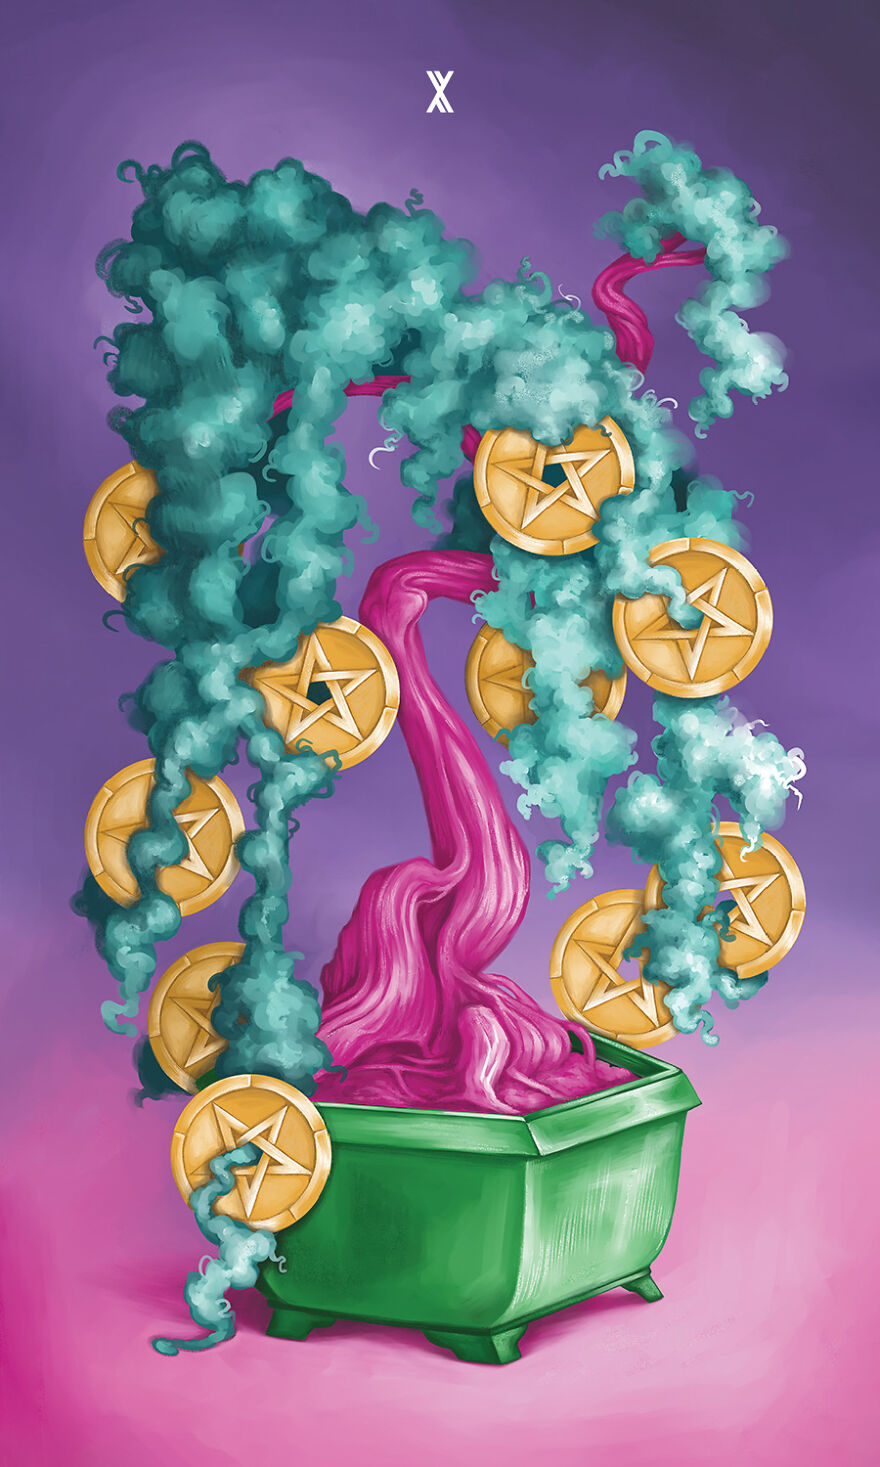 The Ten Of Pentacles (I Call Them Coins) - I Had An Asian Money Tree In Mind When I Painted This One.